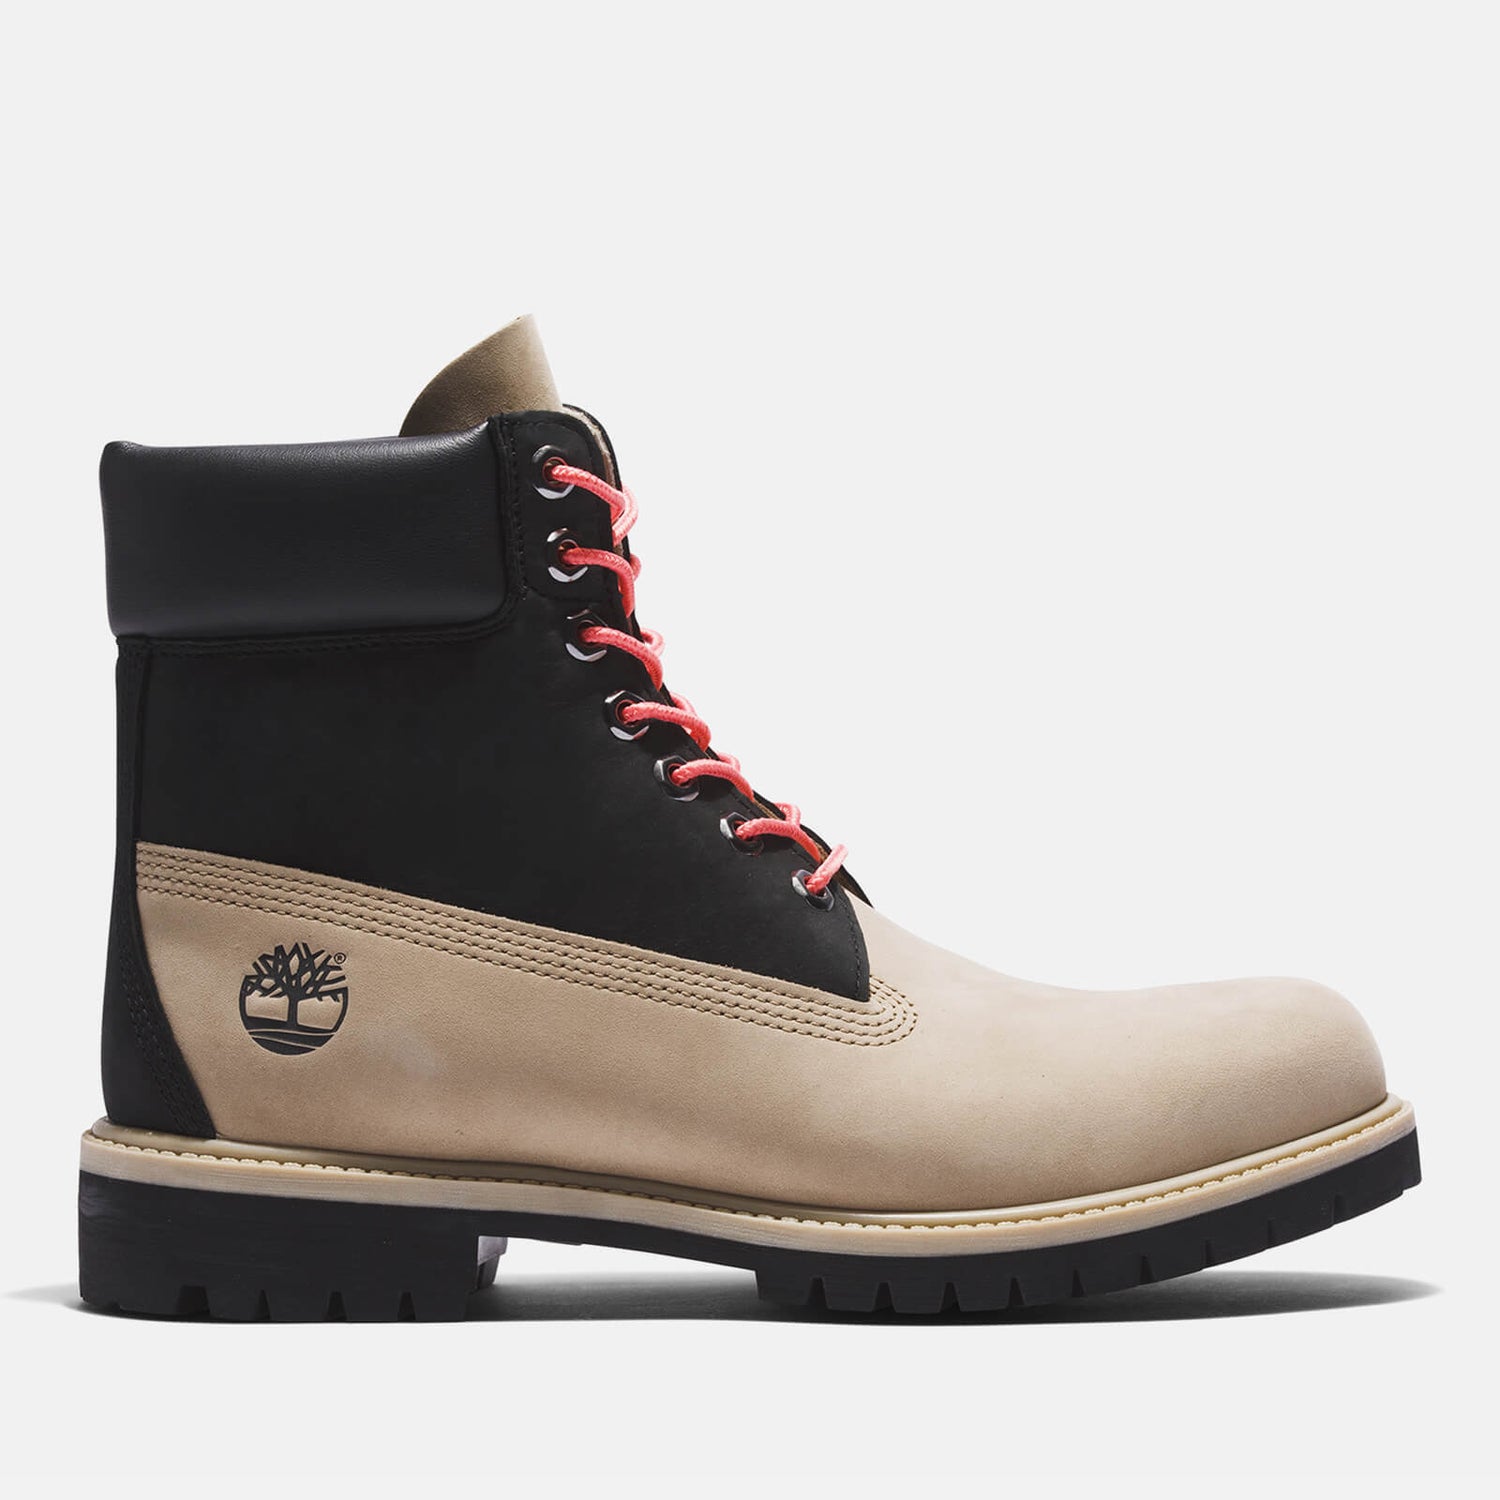 Timberland Premium Two-Tone Leather Boots - UK 7